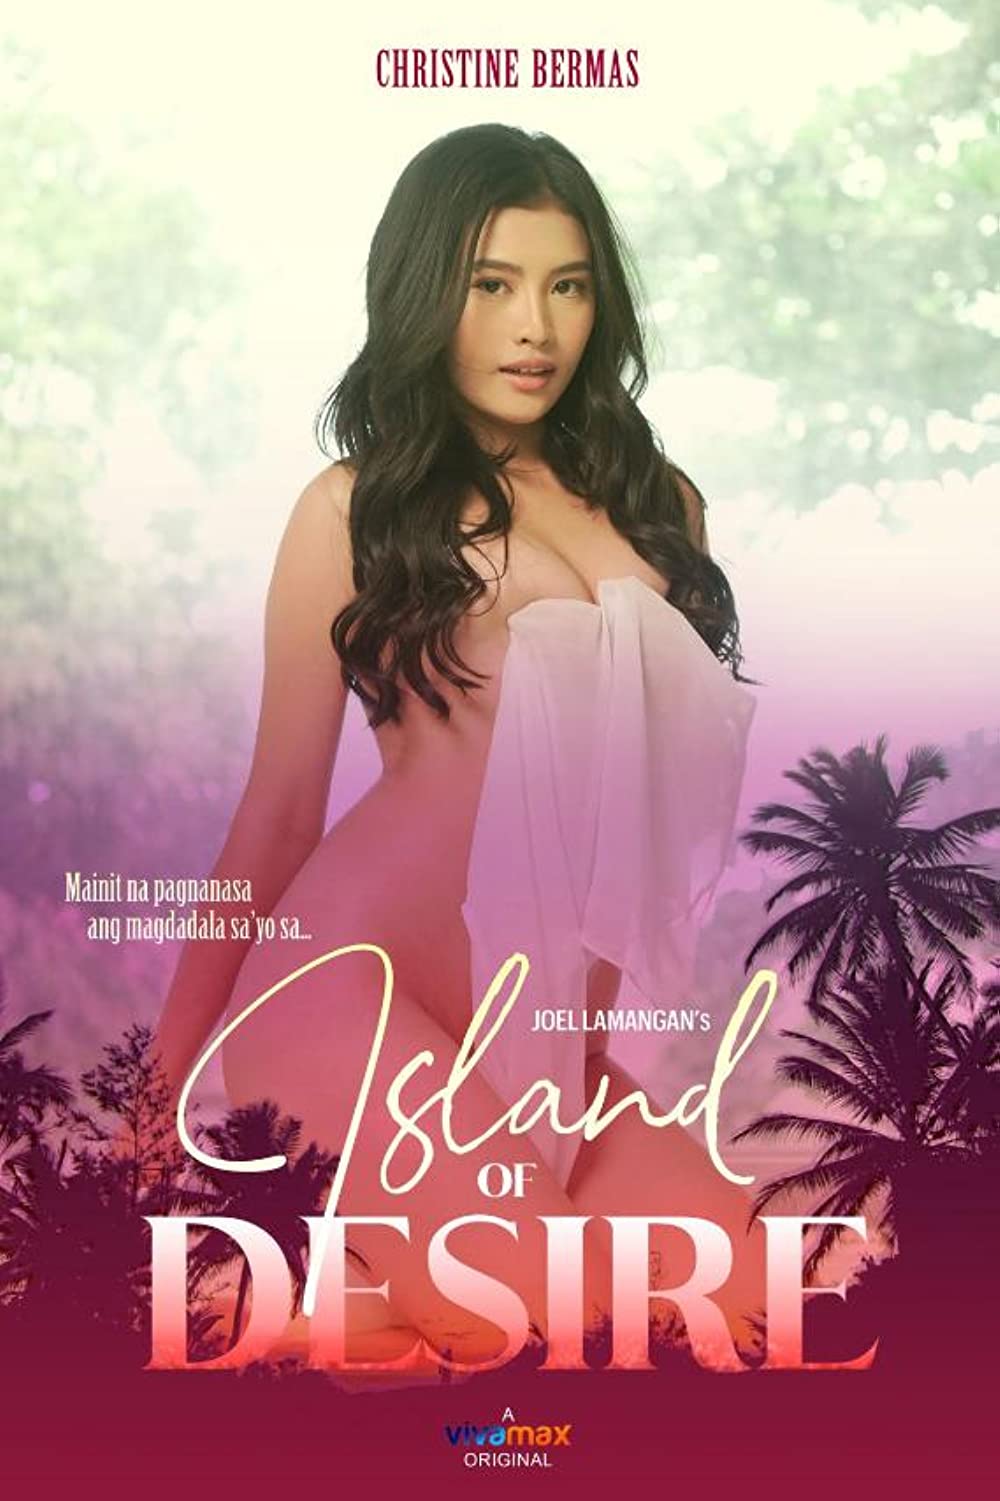 Island of Desire Movie (2022) Cast & Crew, Release Date, Story, Review, Poster, Trailer, Budget, Collection
